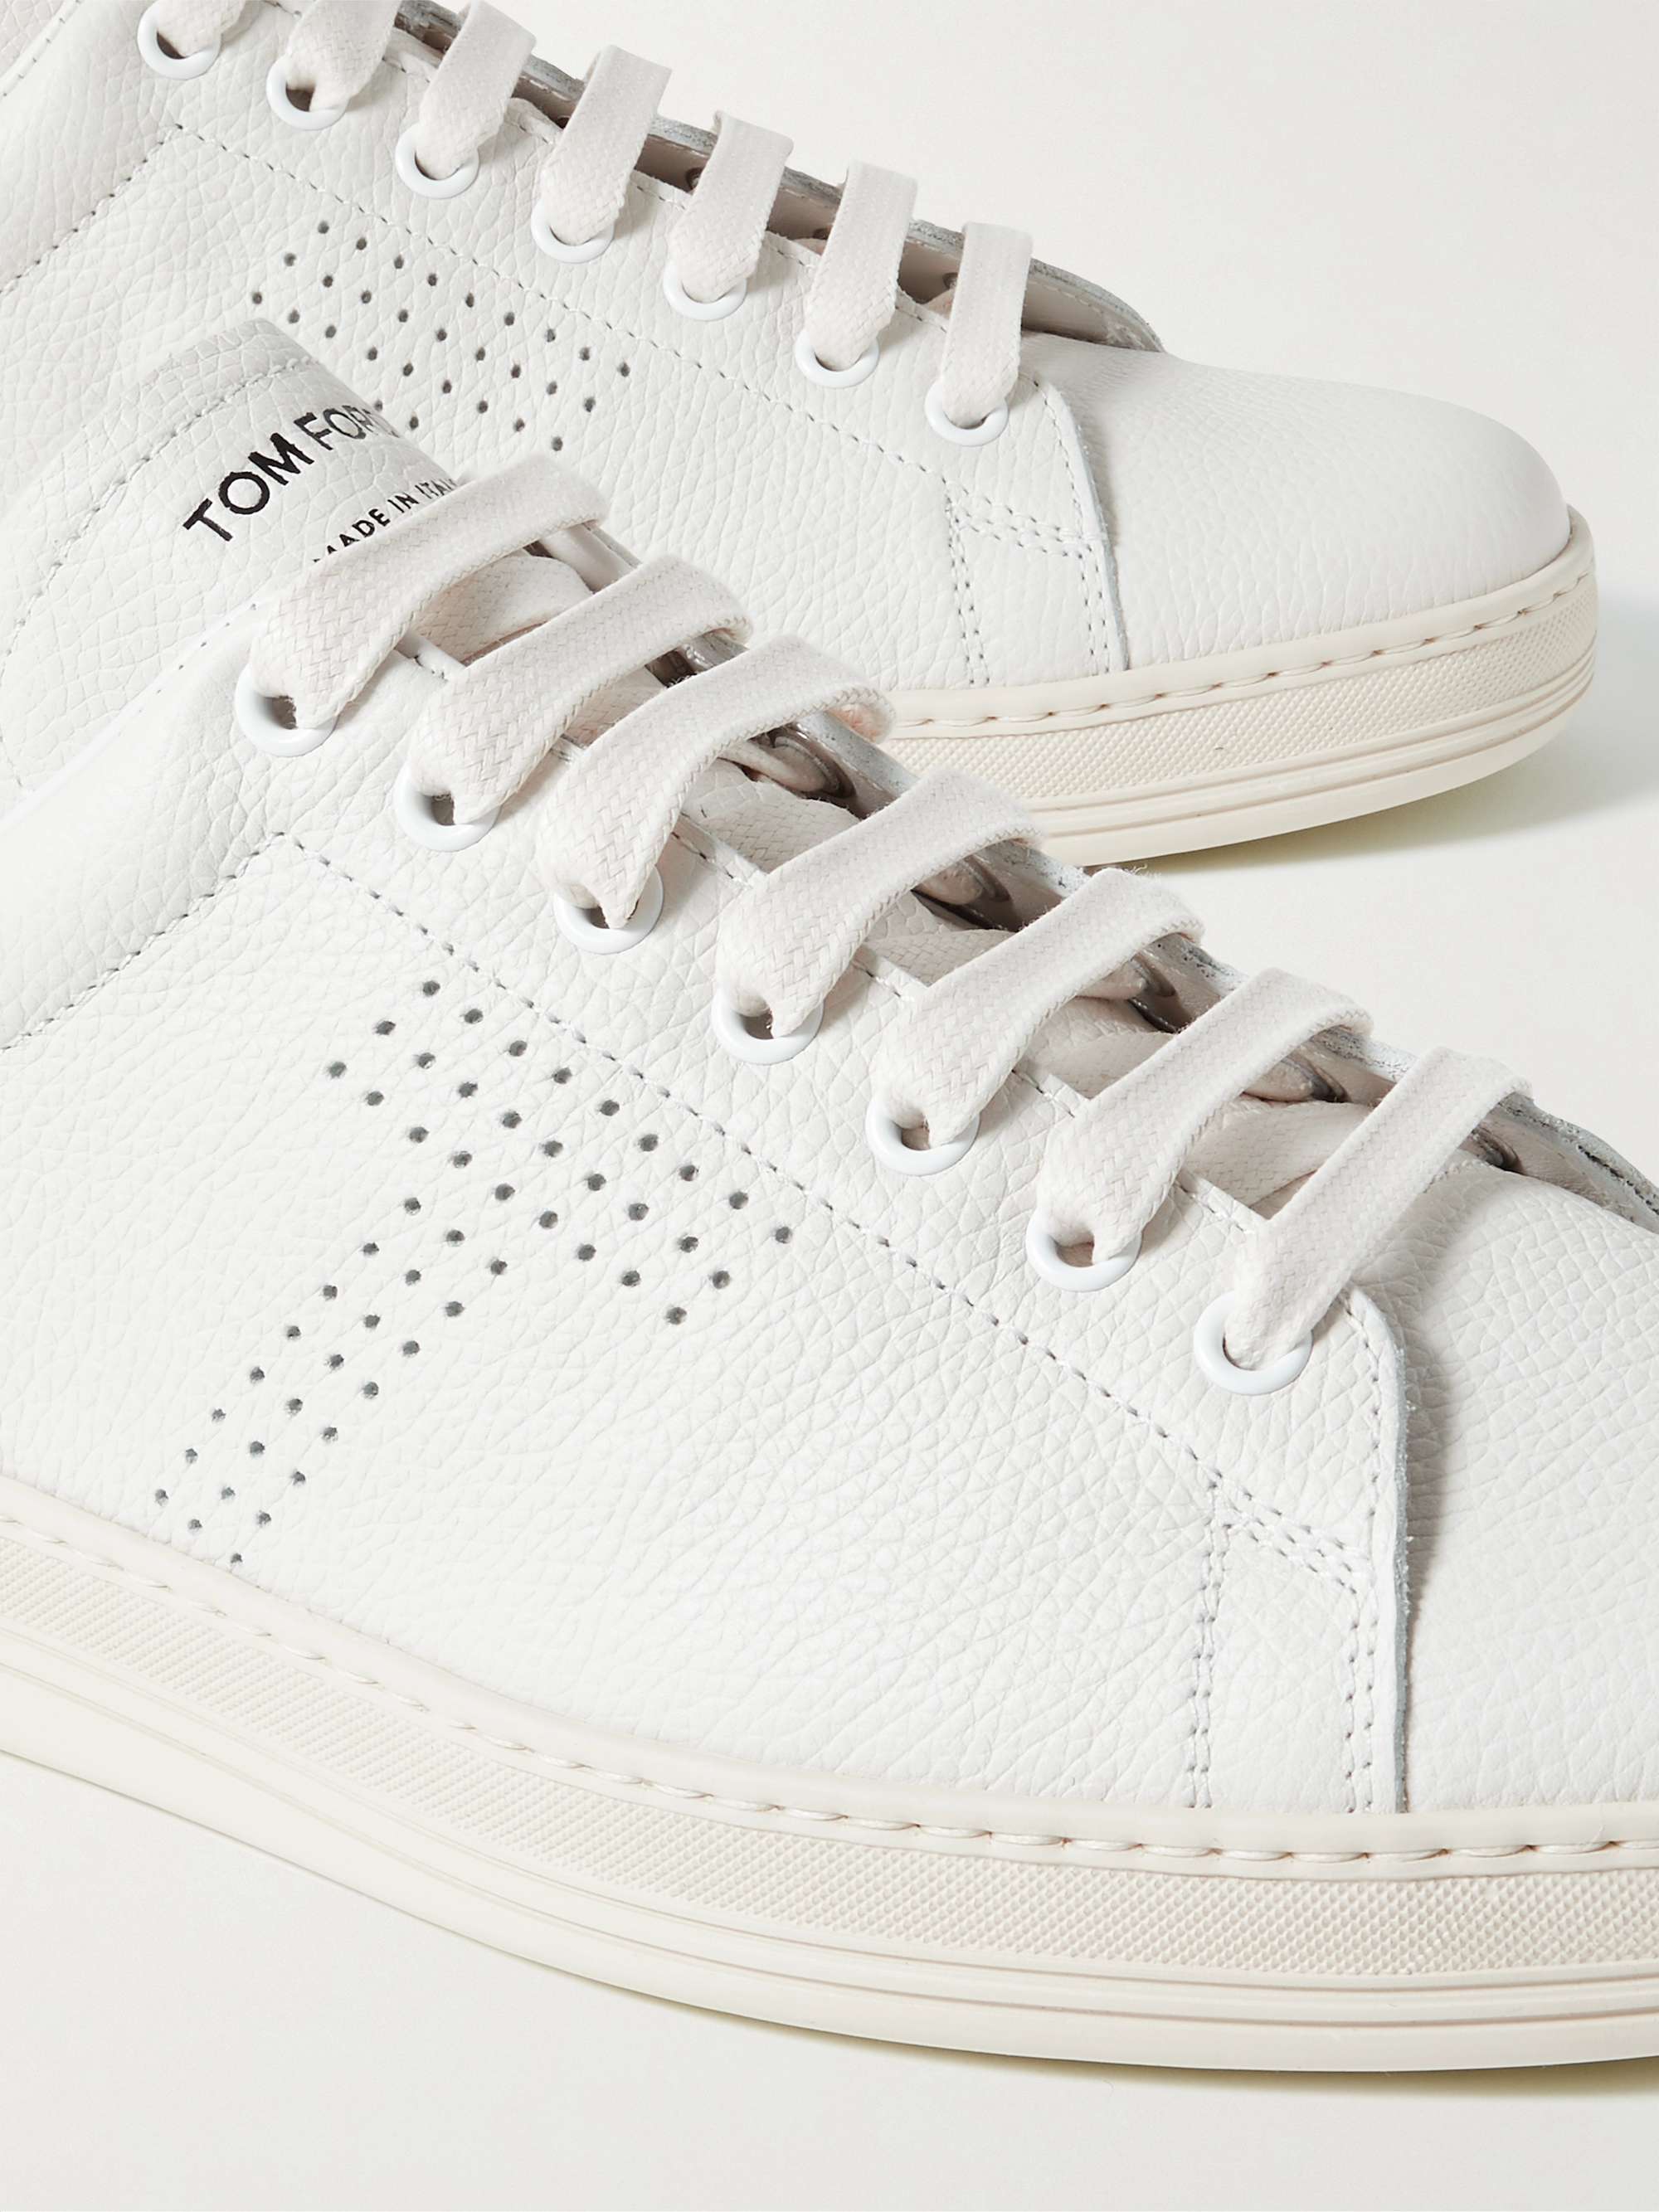 TOM FORD Warwick Perforated Full-Grain Leather Sneakers for Men | MR PORTER